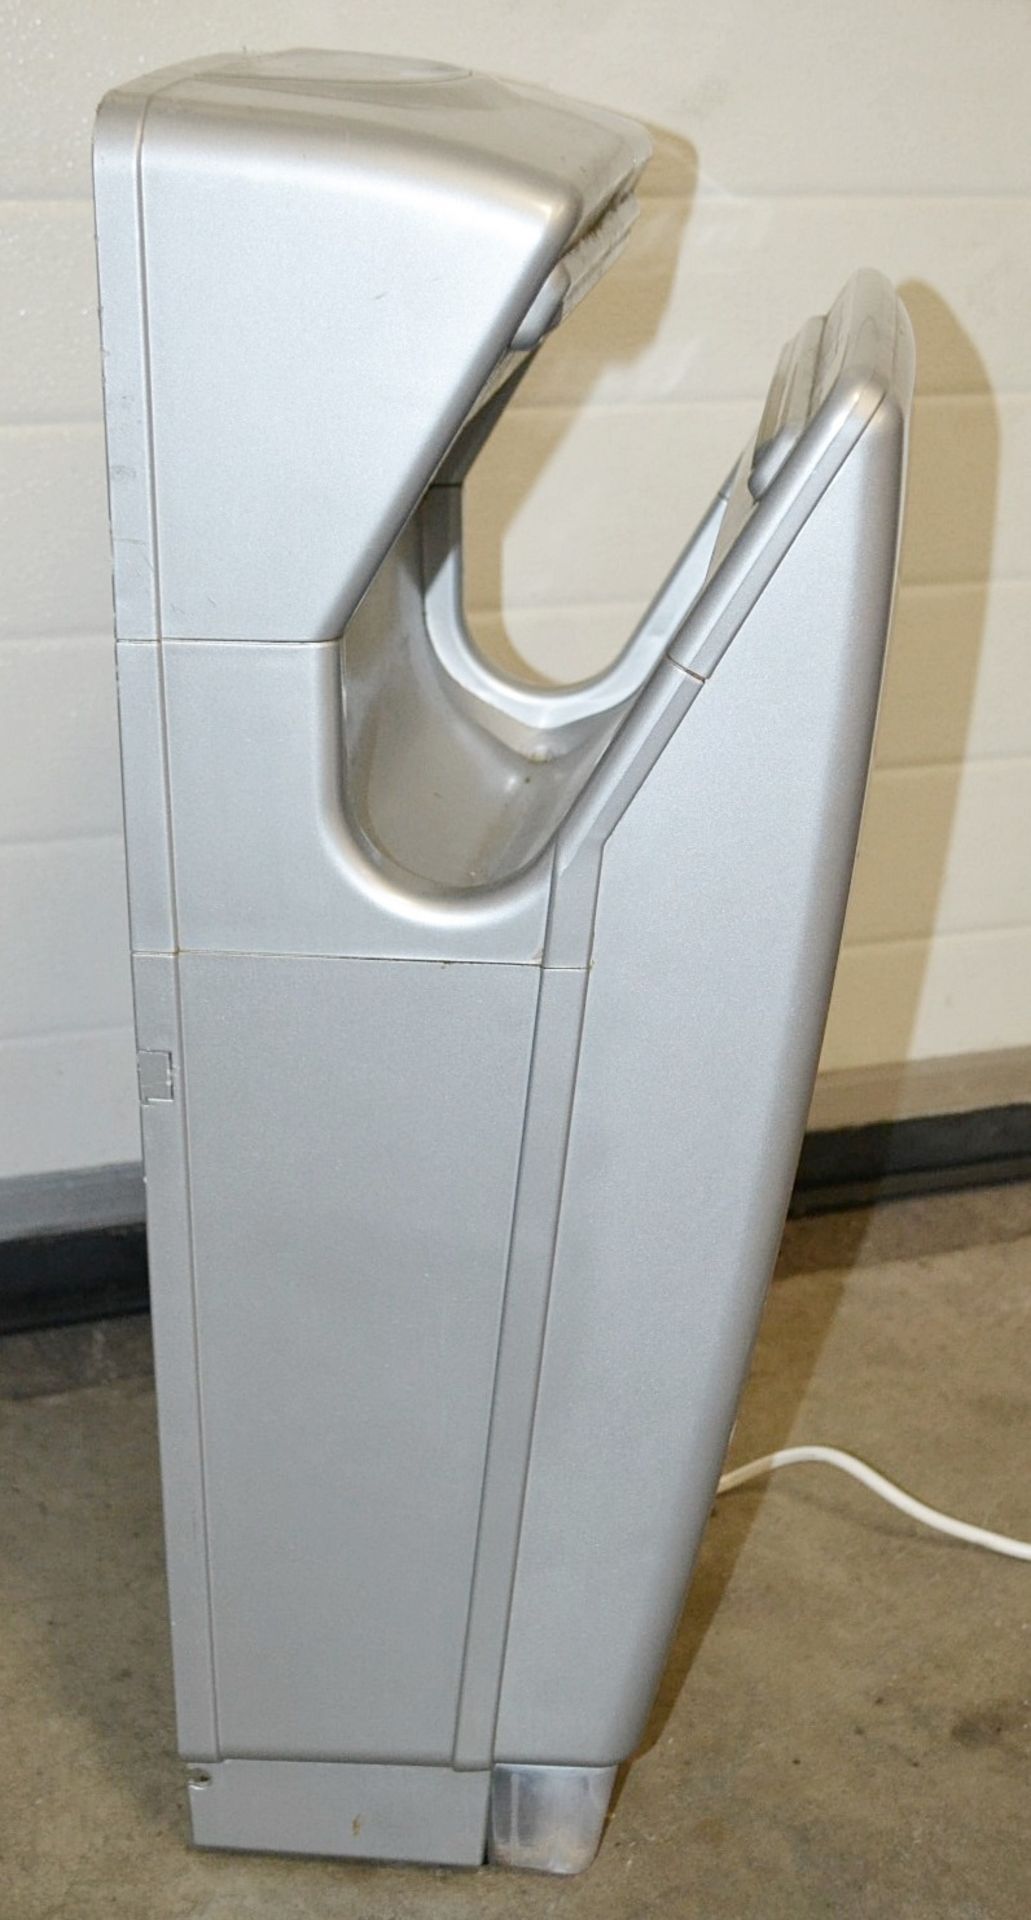 1 x BIODRIER Business Automatic Hand Dryer In Silver - Model: BB70S - Used - Image 3 of 9